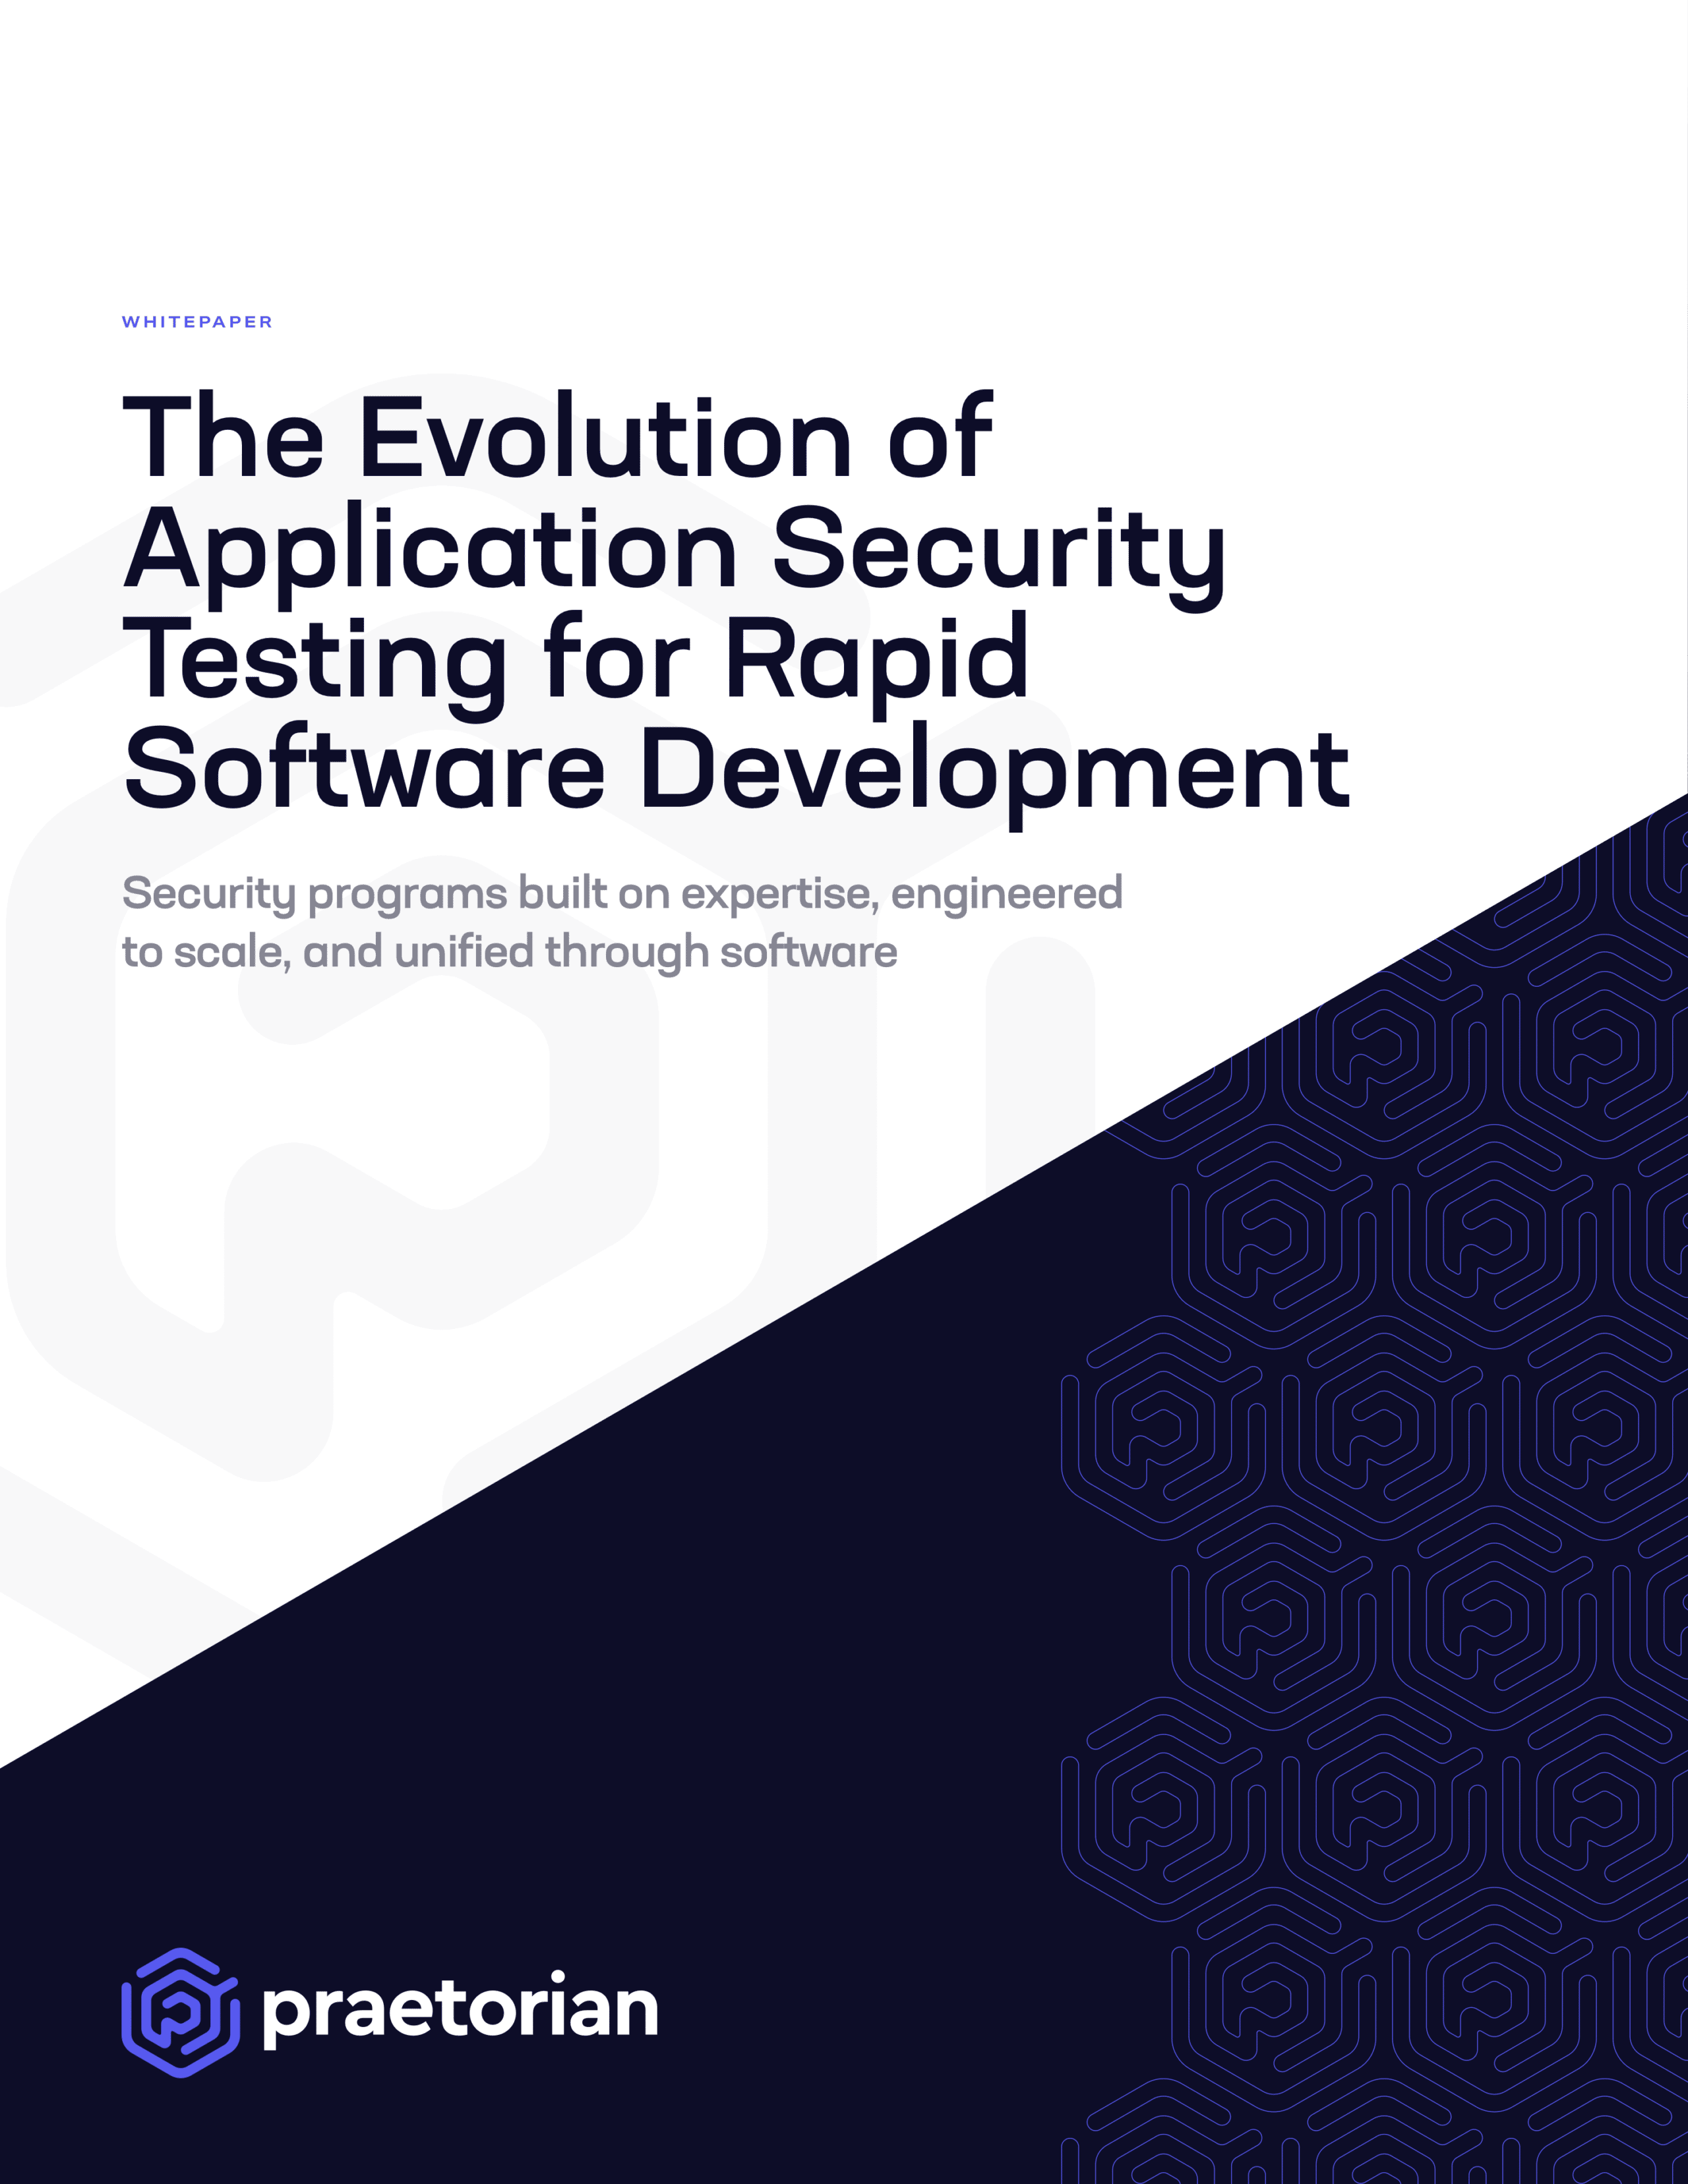 The Evolution of Application Security Testing for Rapid Software Development